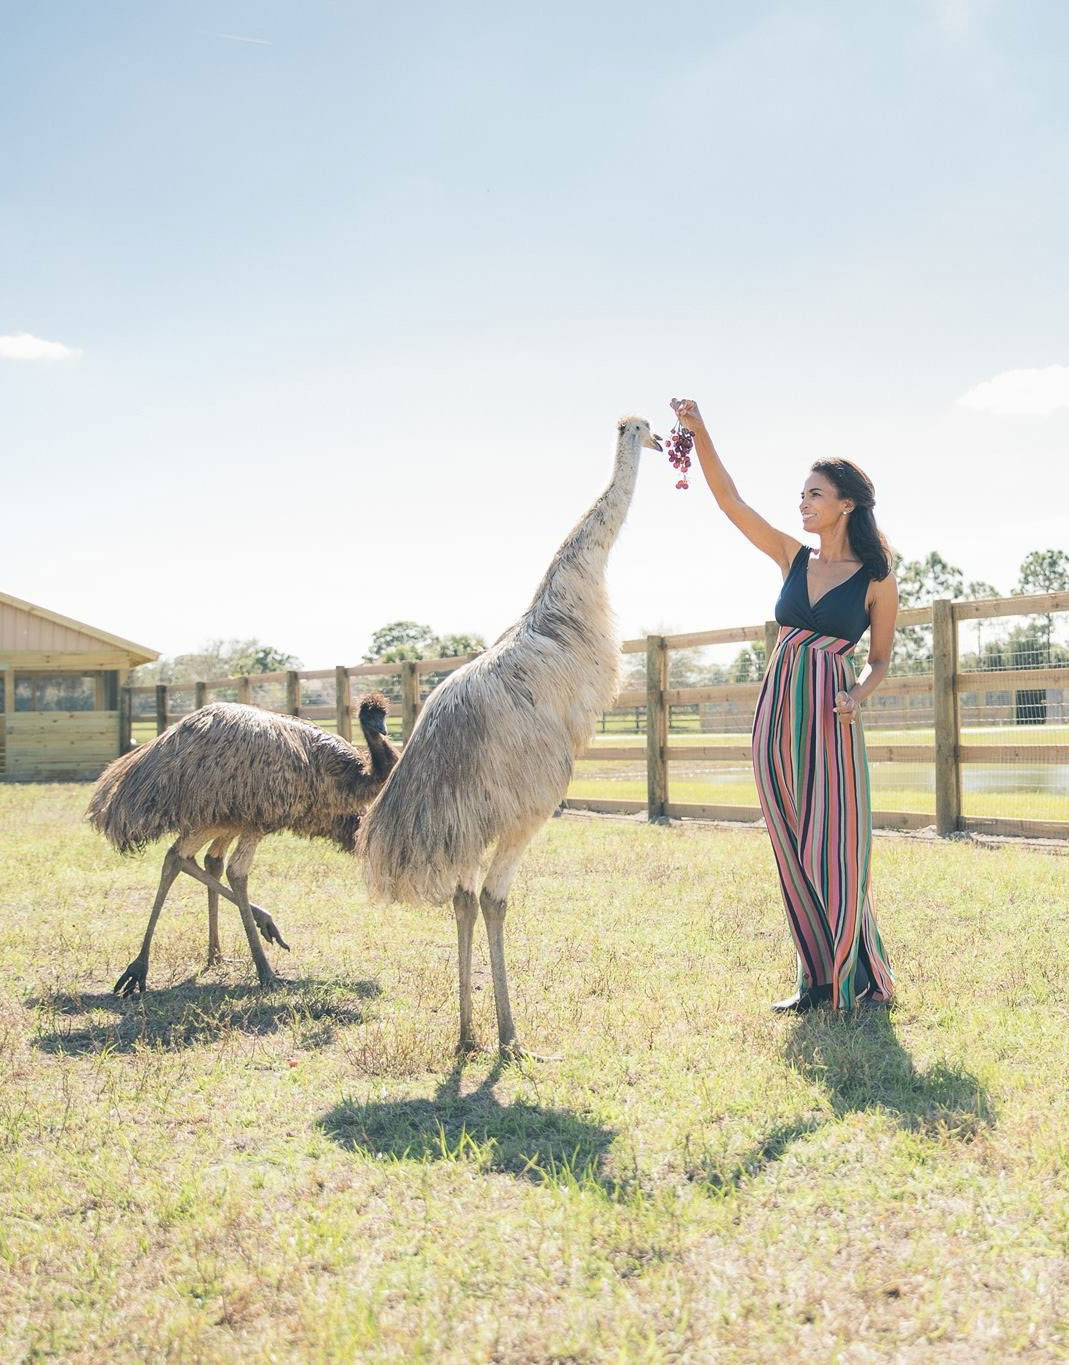 Karin with her Emus